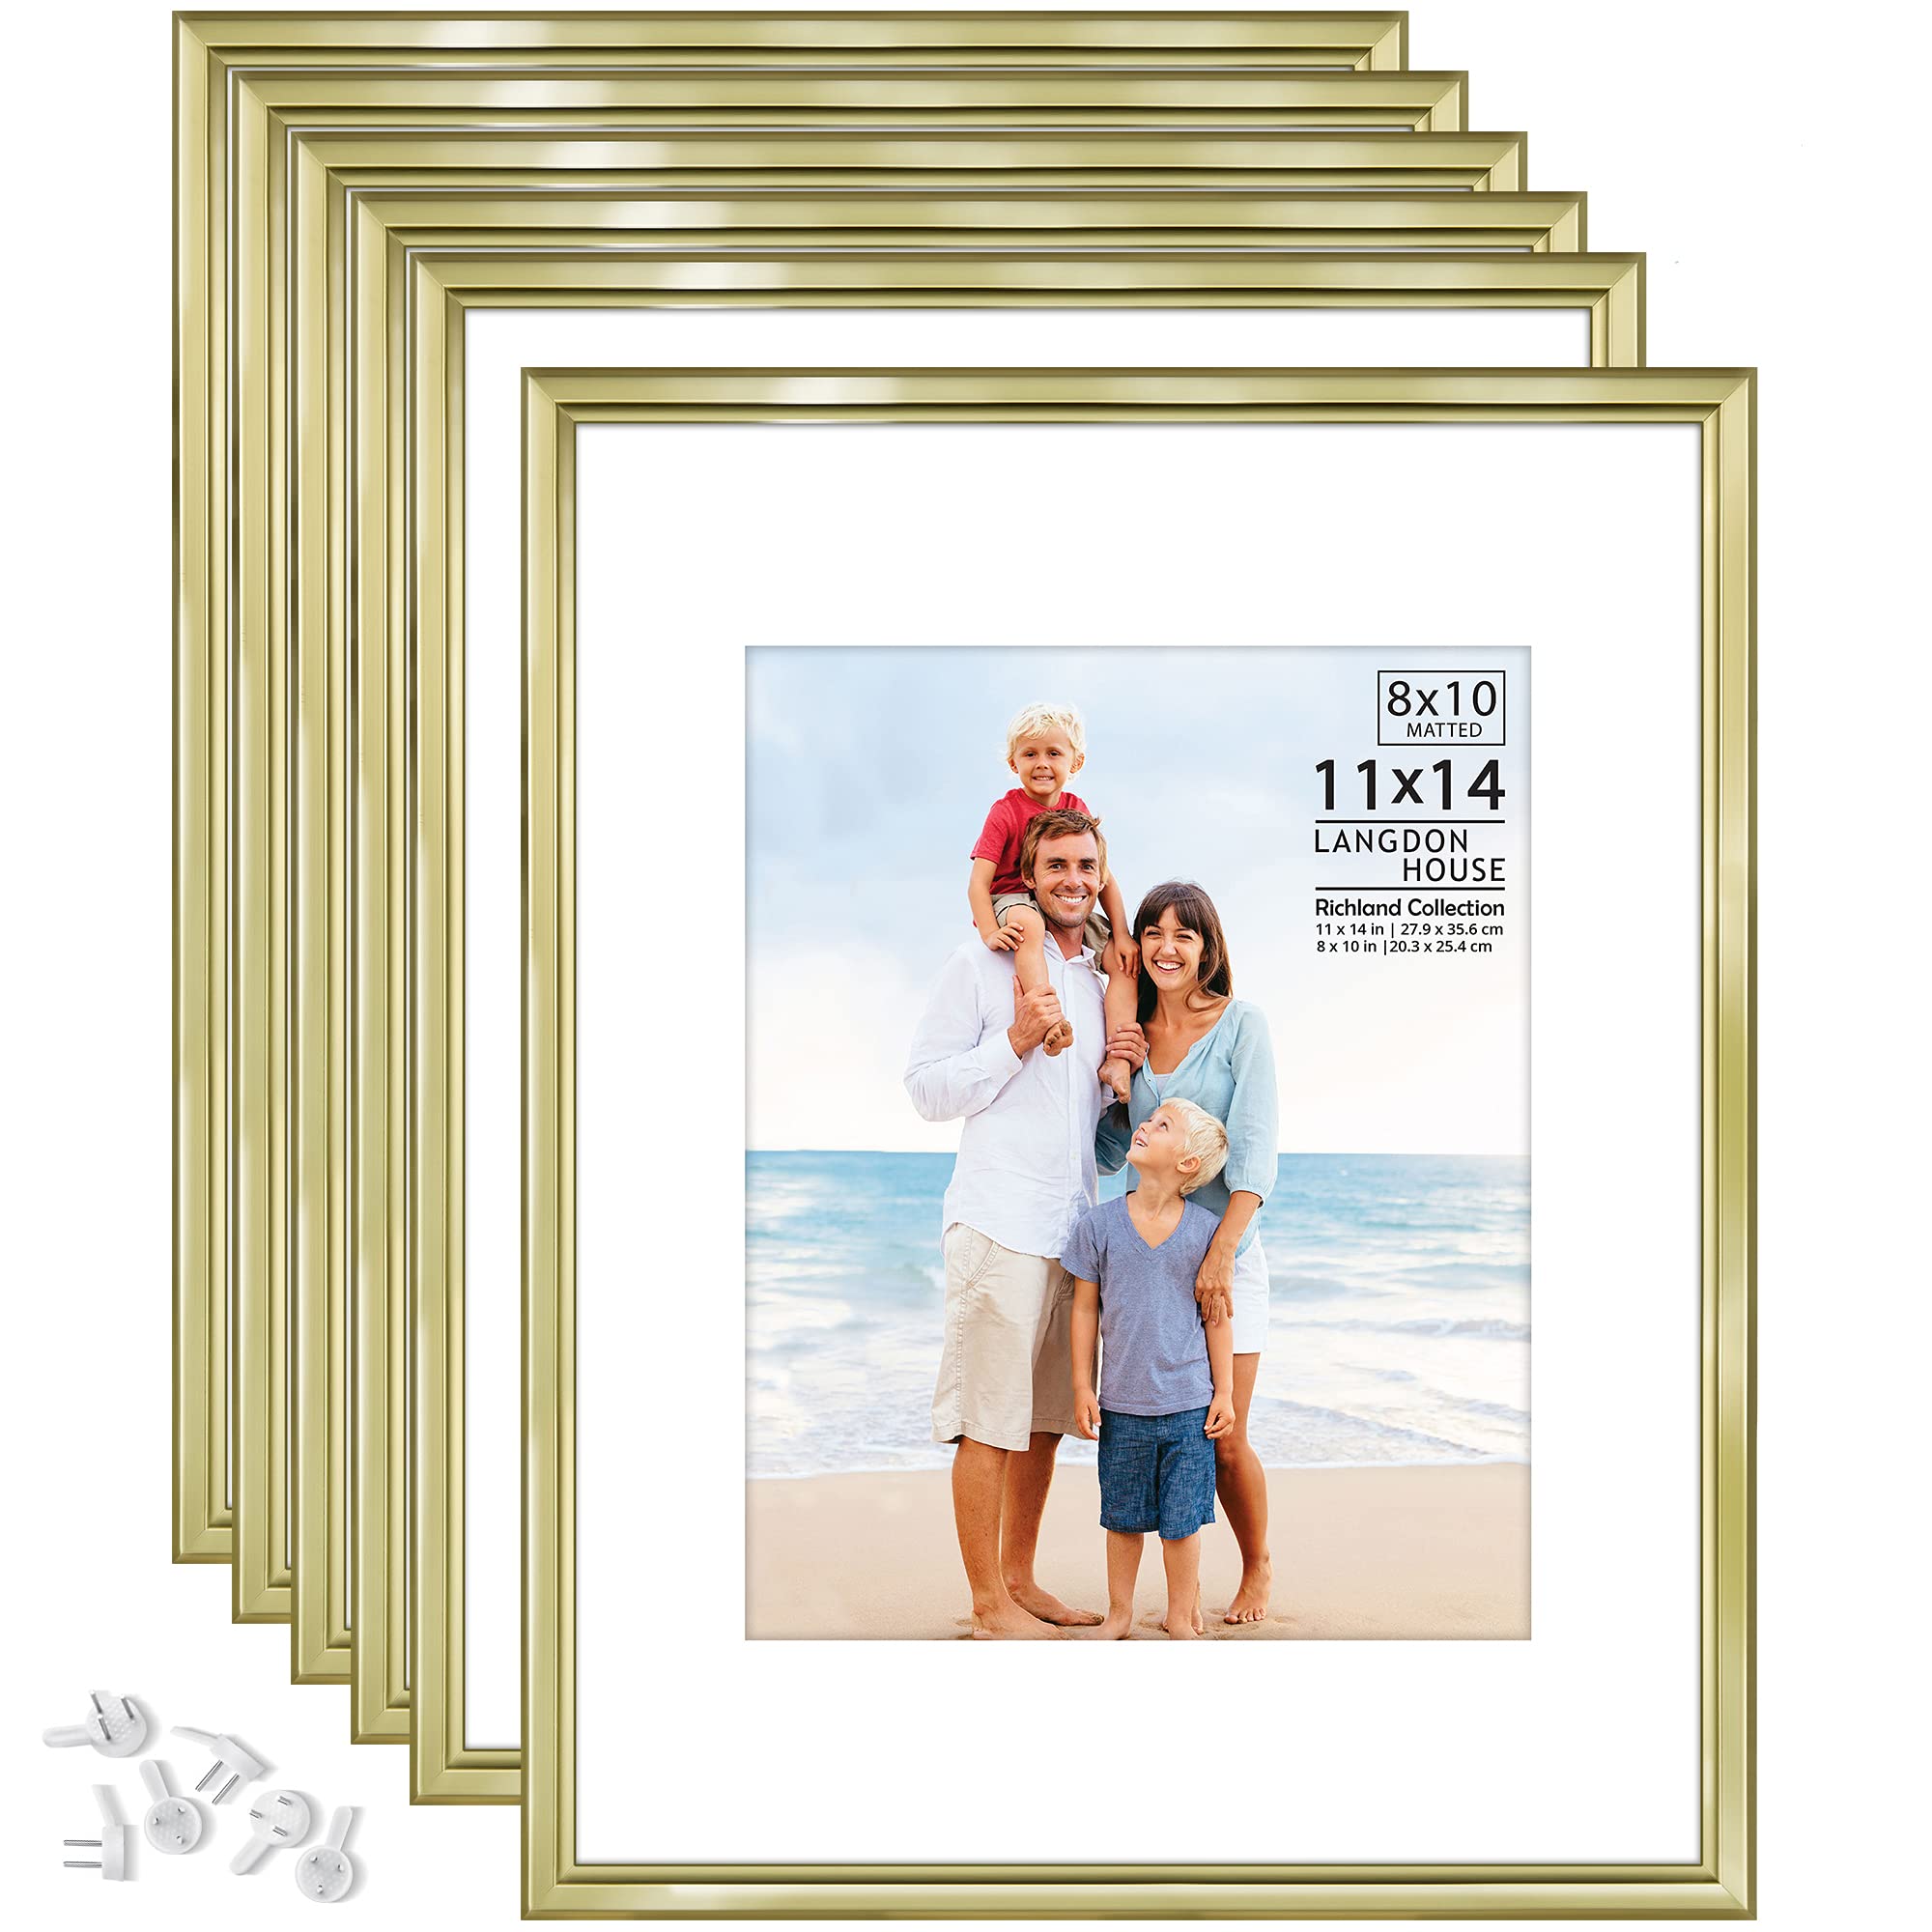 Langdon House 11x14 Gold Picture Frames w/ Mat for 8x10 Photo, Contemporary  Style, 6 Pack, Richland Collection (US Company) 